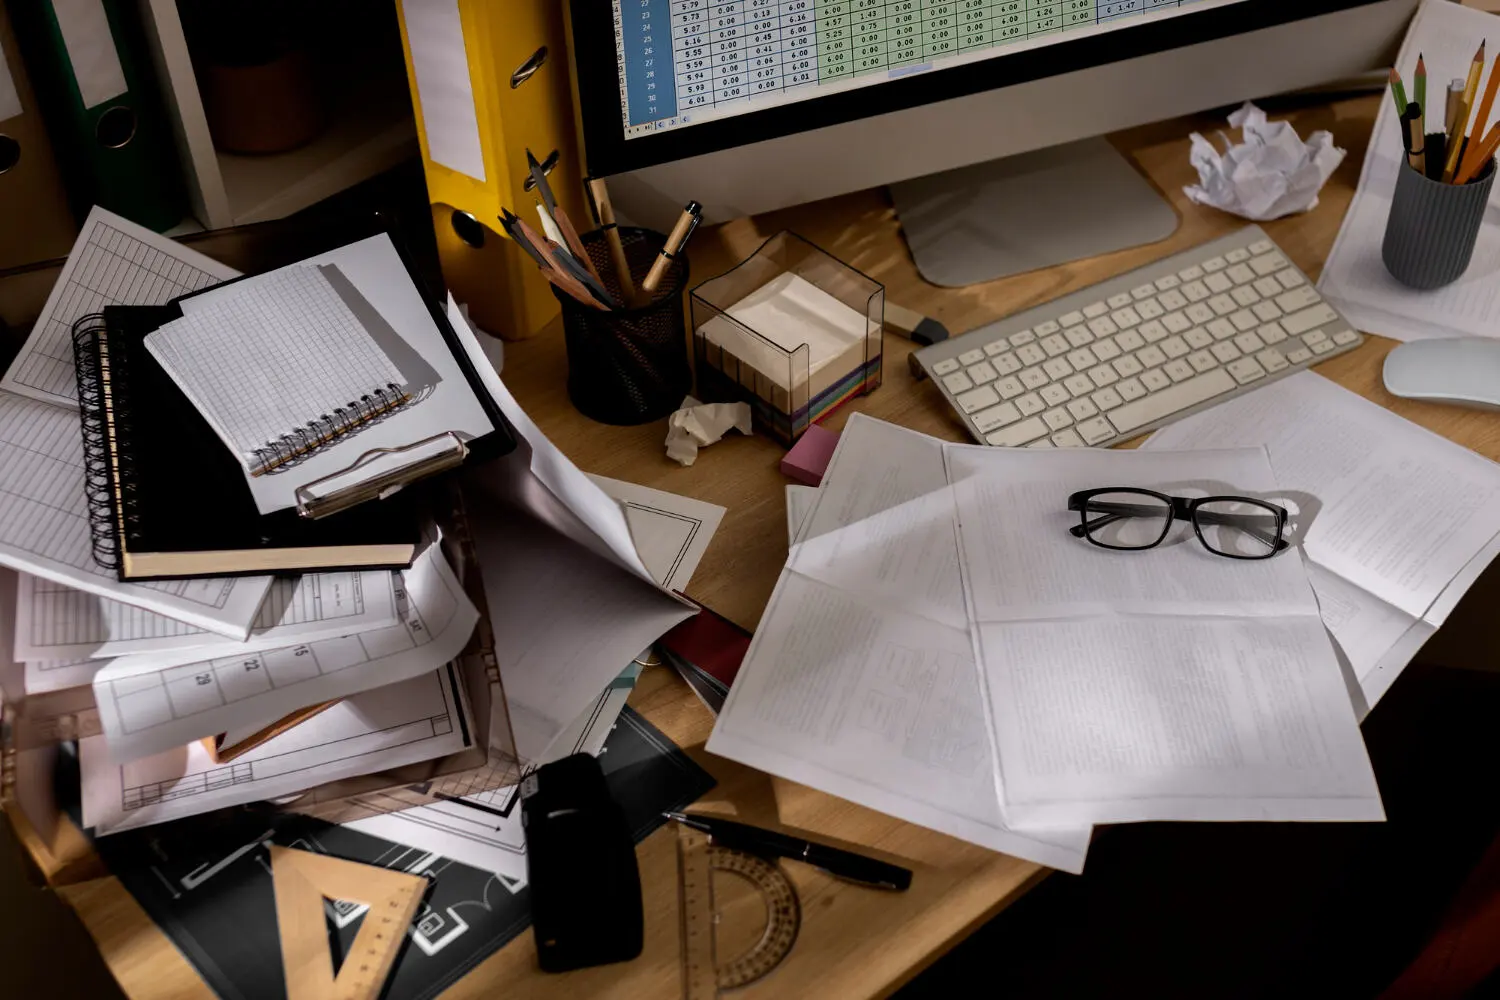 Cluttered and dirty office desk